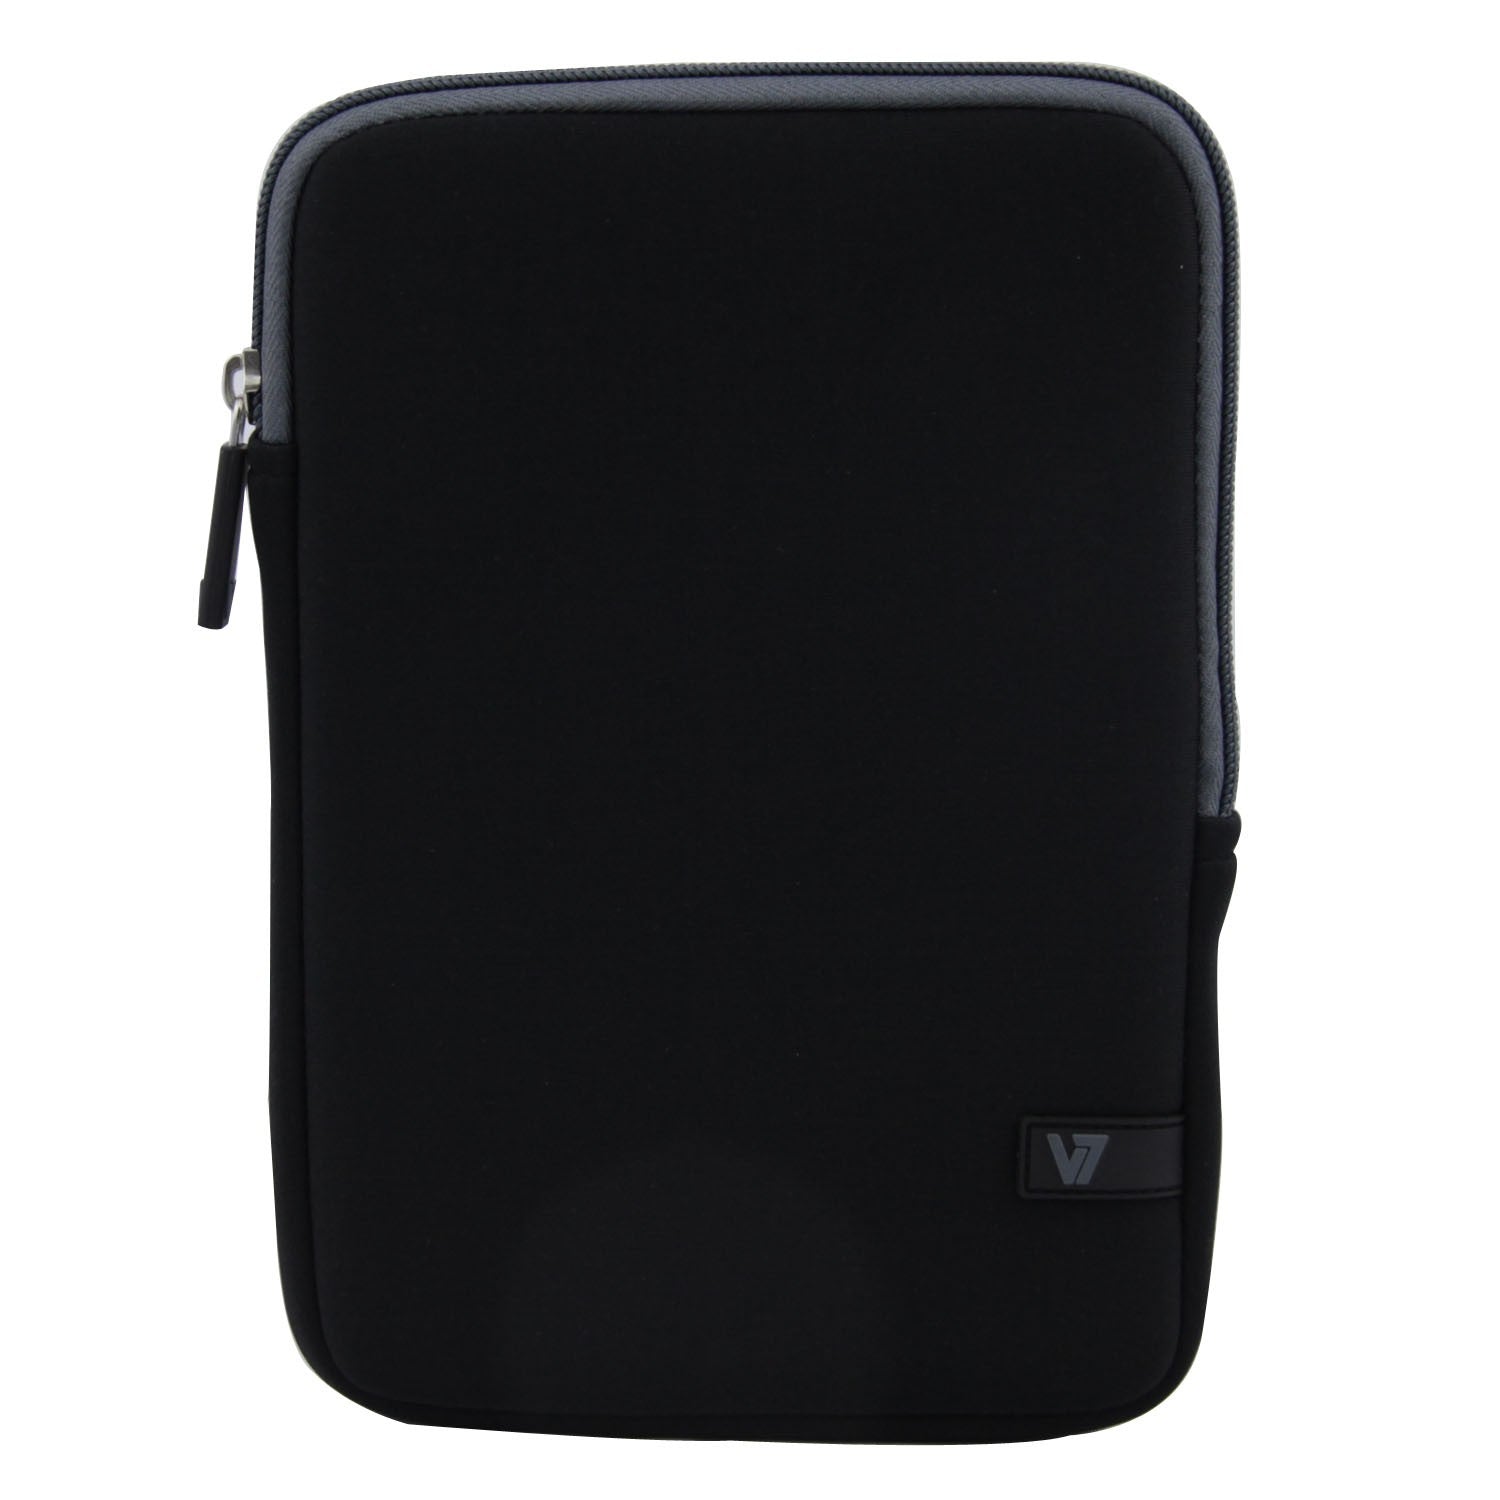 Protective Sleeve for iPad or Tablet Up to 8"